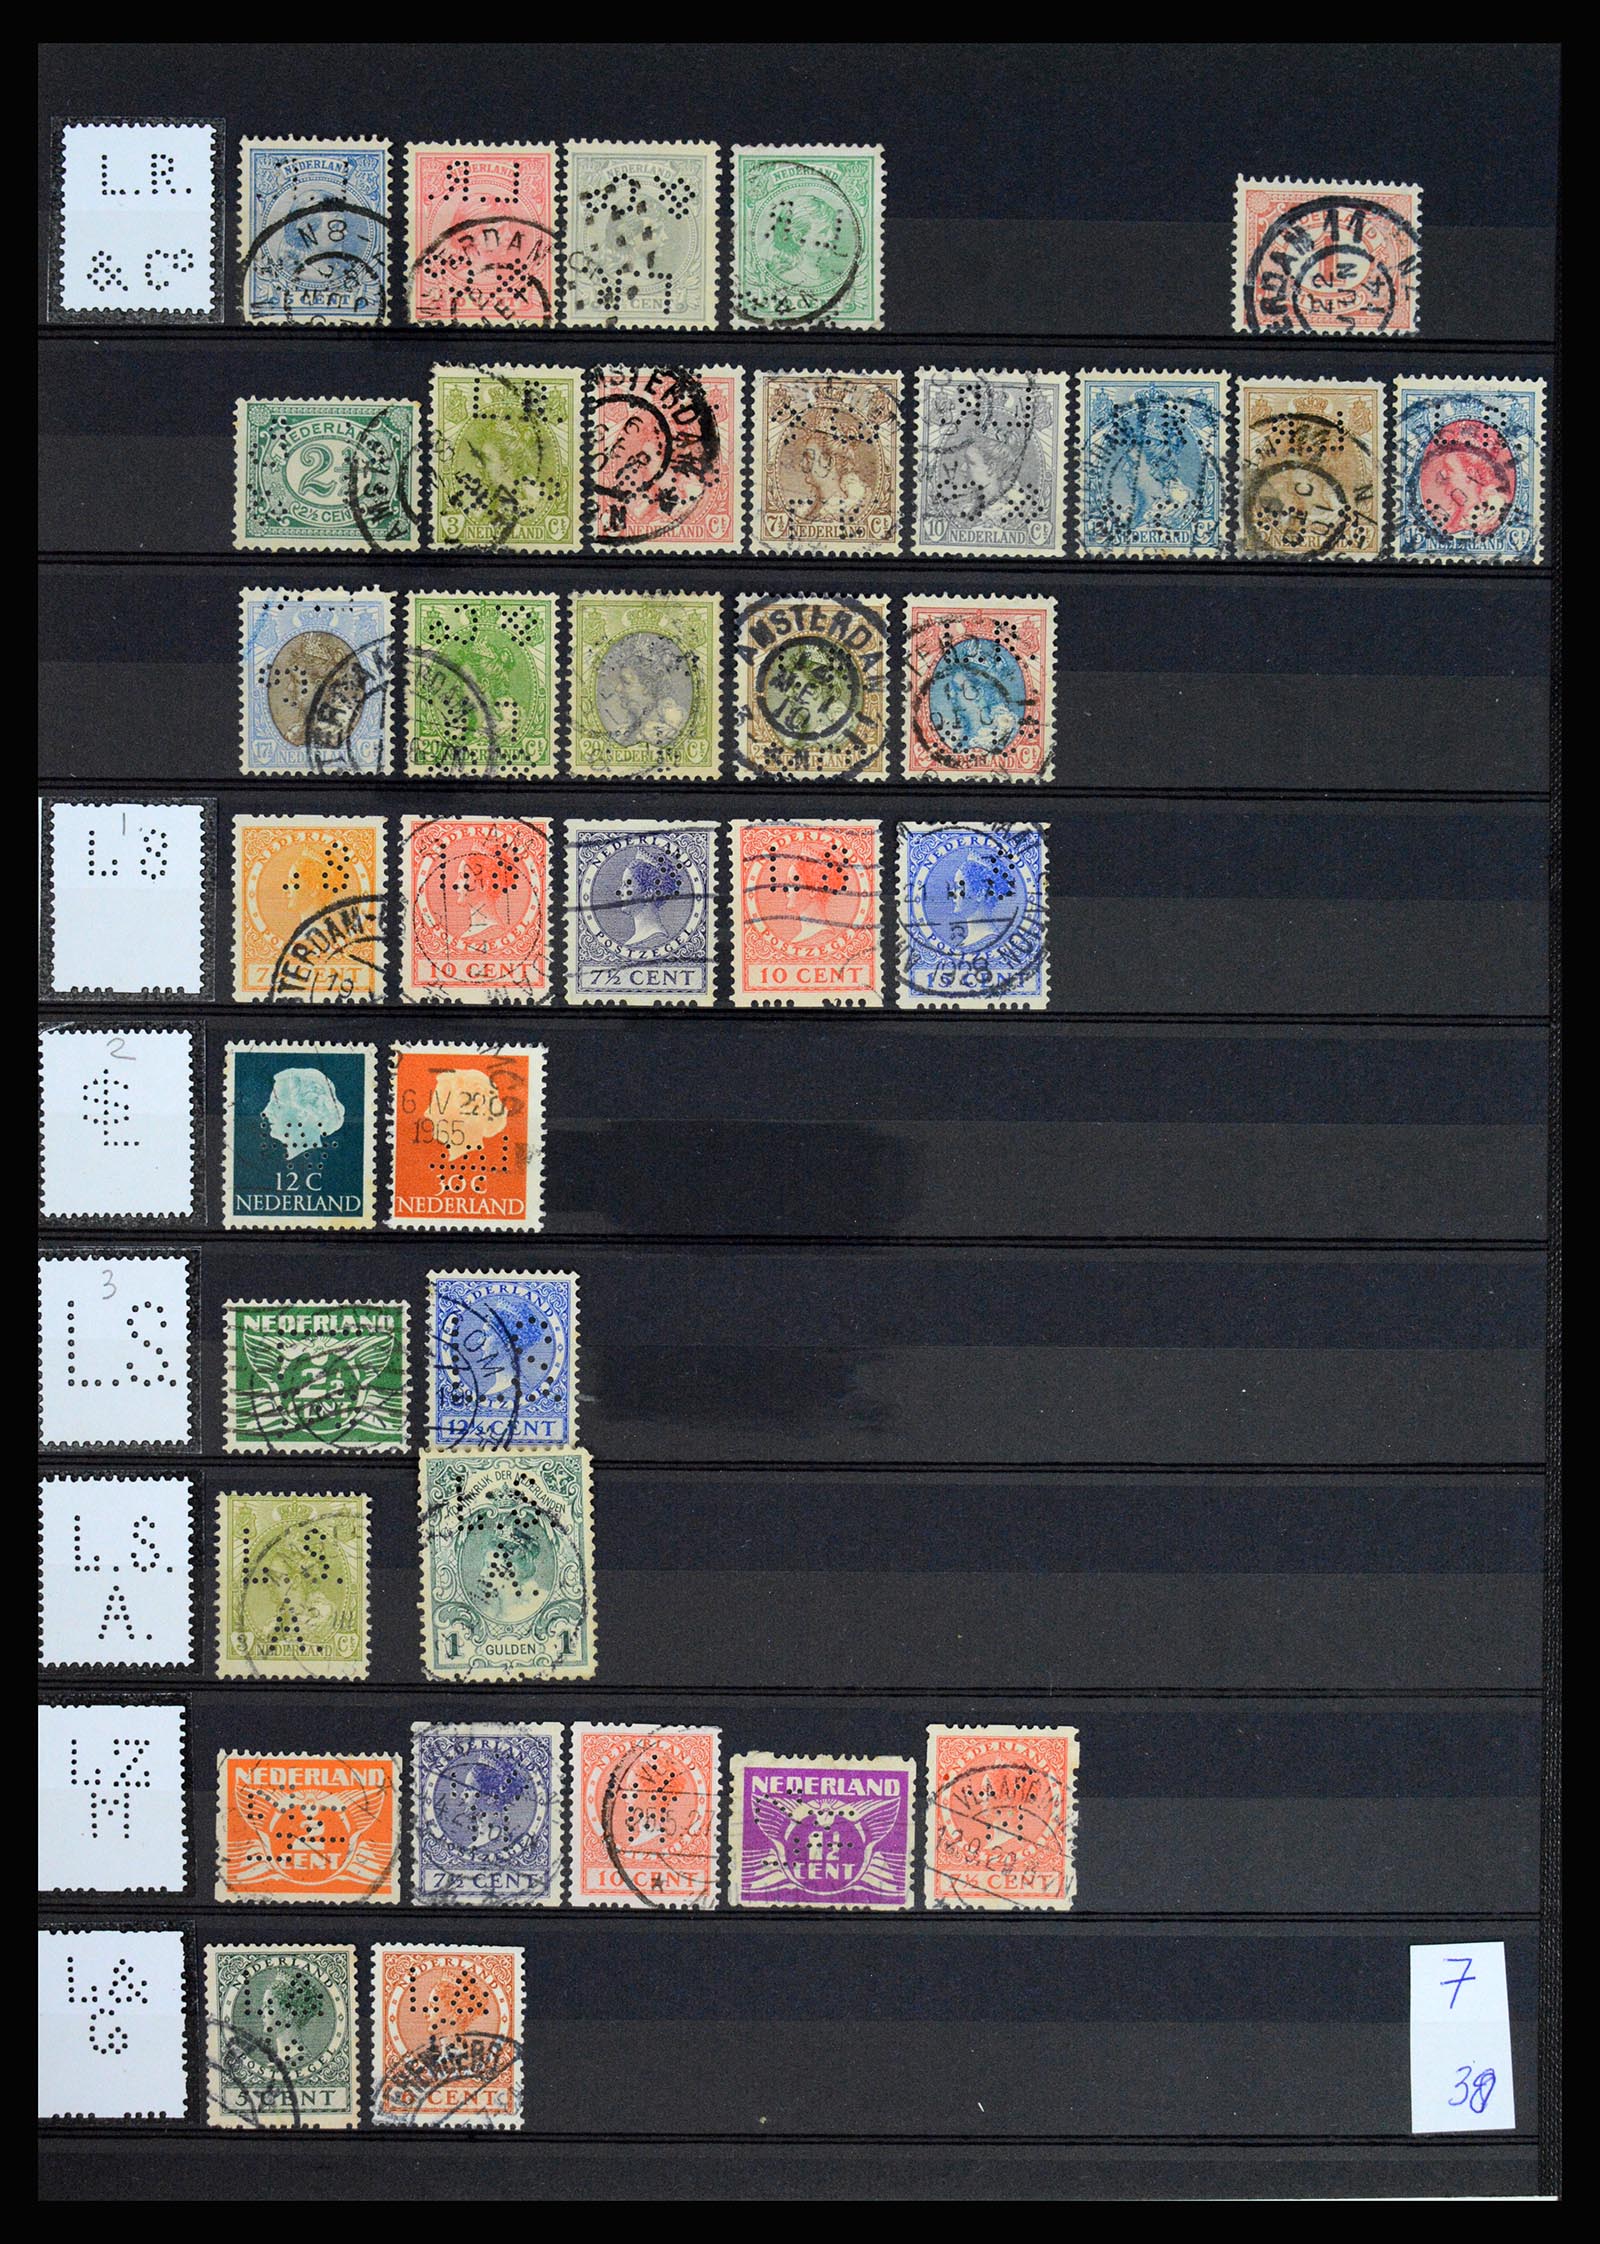 37183 031 - Stamp collection 37183 Netherlands perfins 1872-1960.